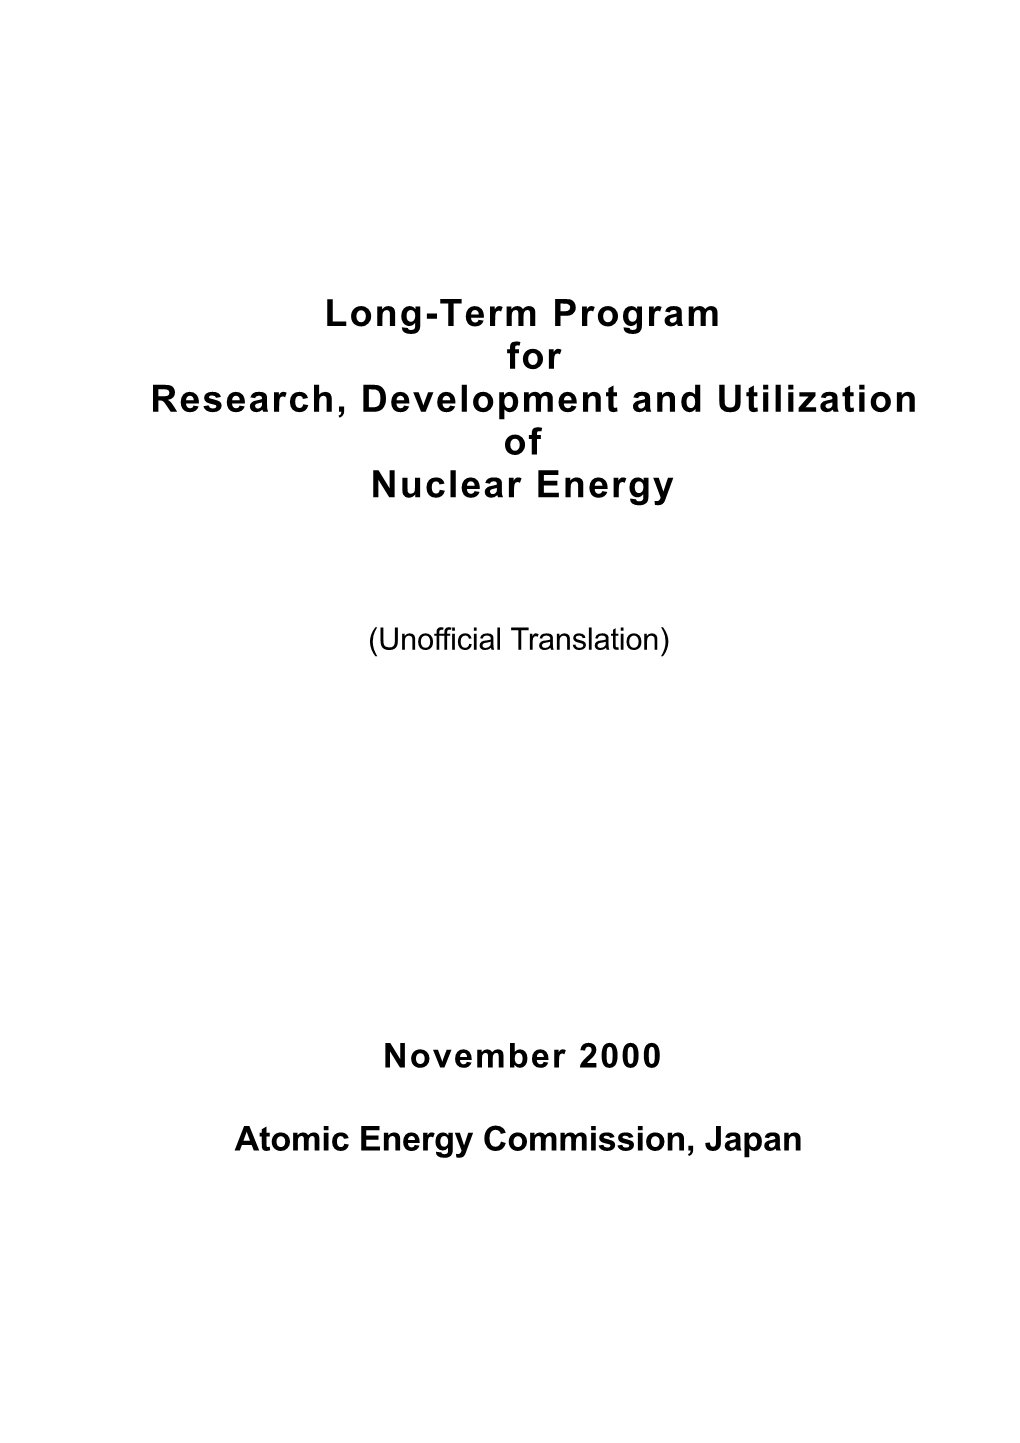 Long-Term Program for Research, Development and Utilization of Nuclear Energy